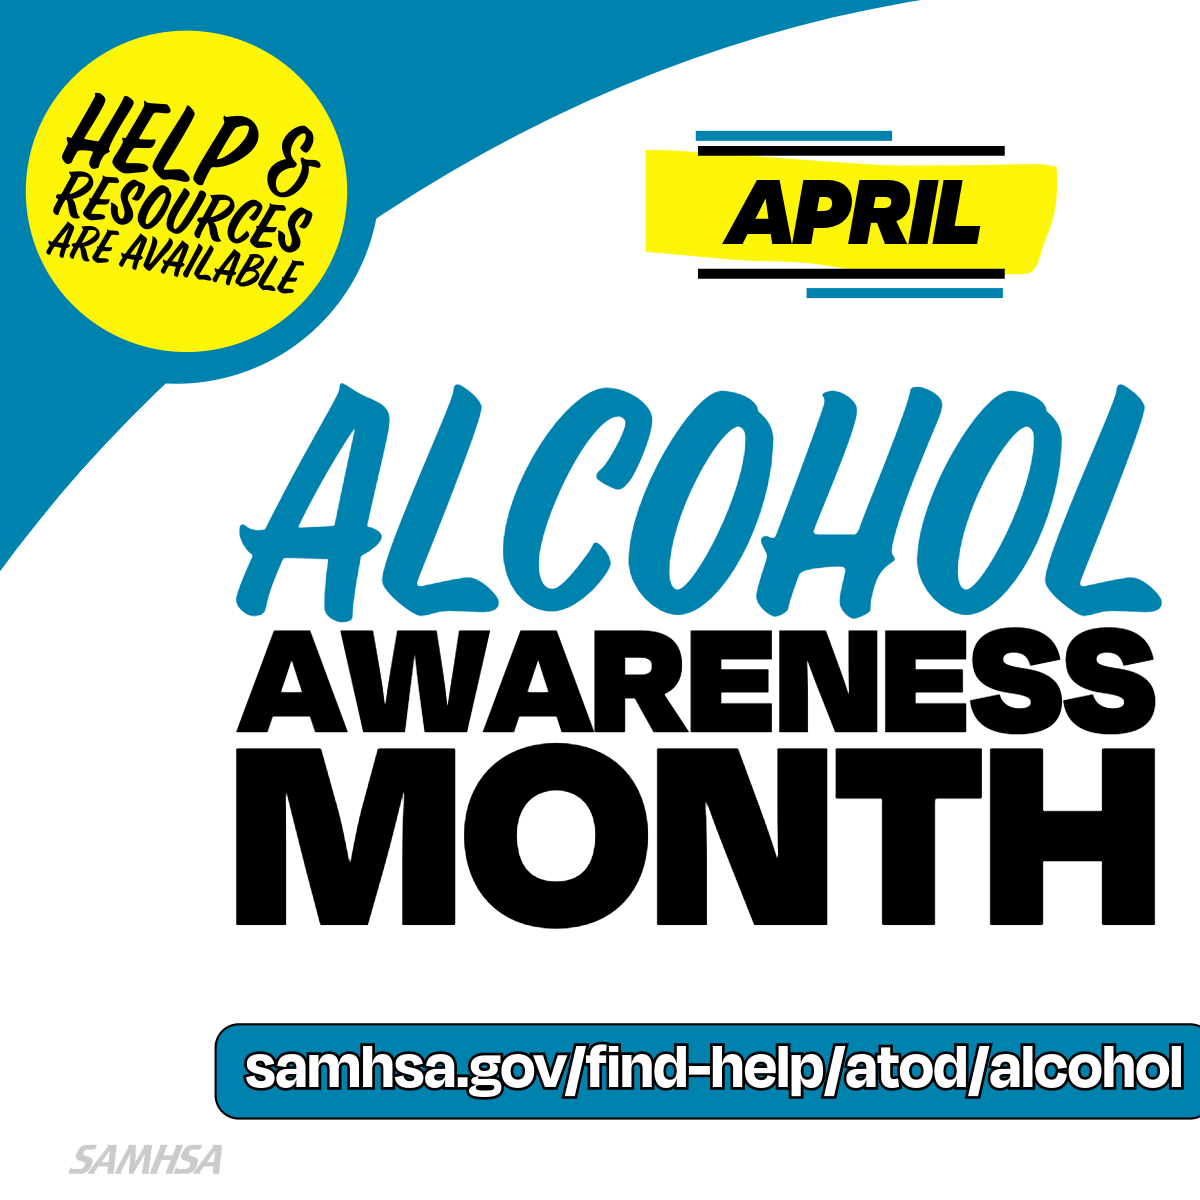 Alcohol awareness month, April, help and resources are available, samhsa.gov/find-help/atod/alcohol